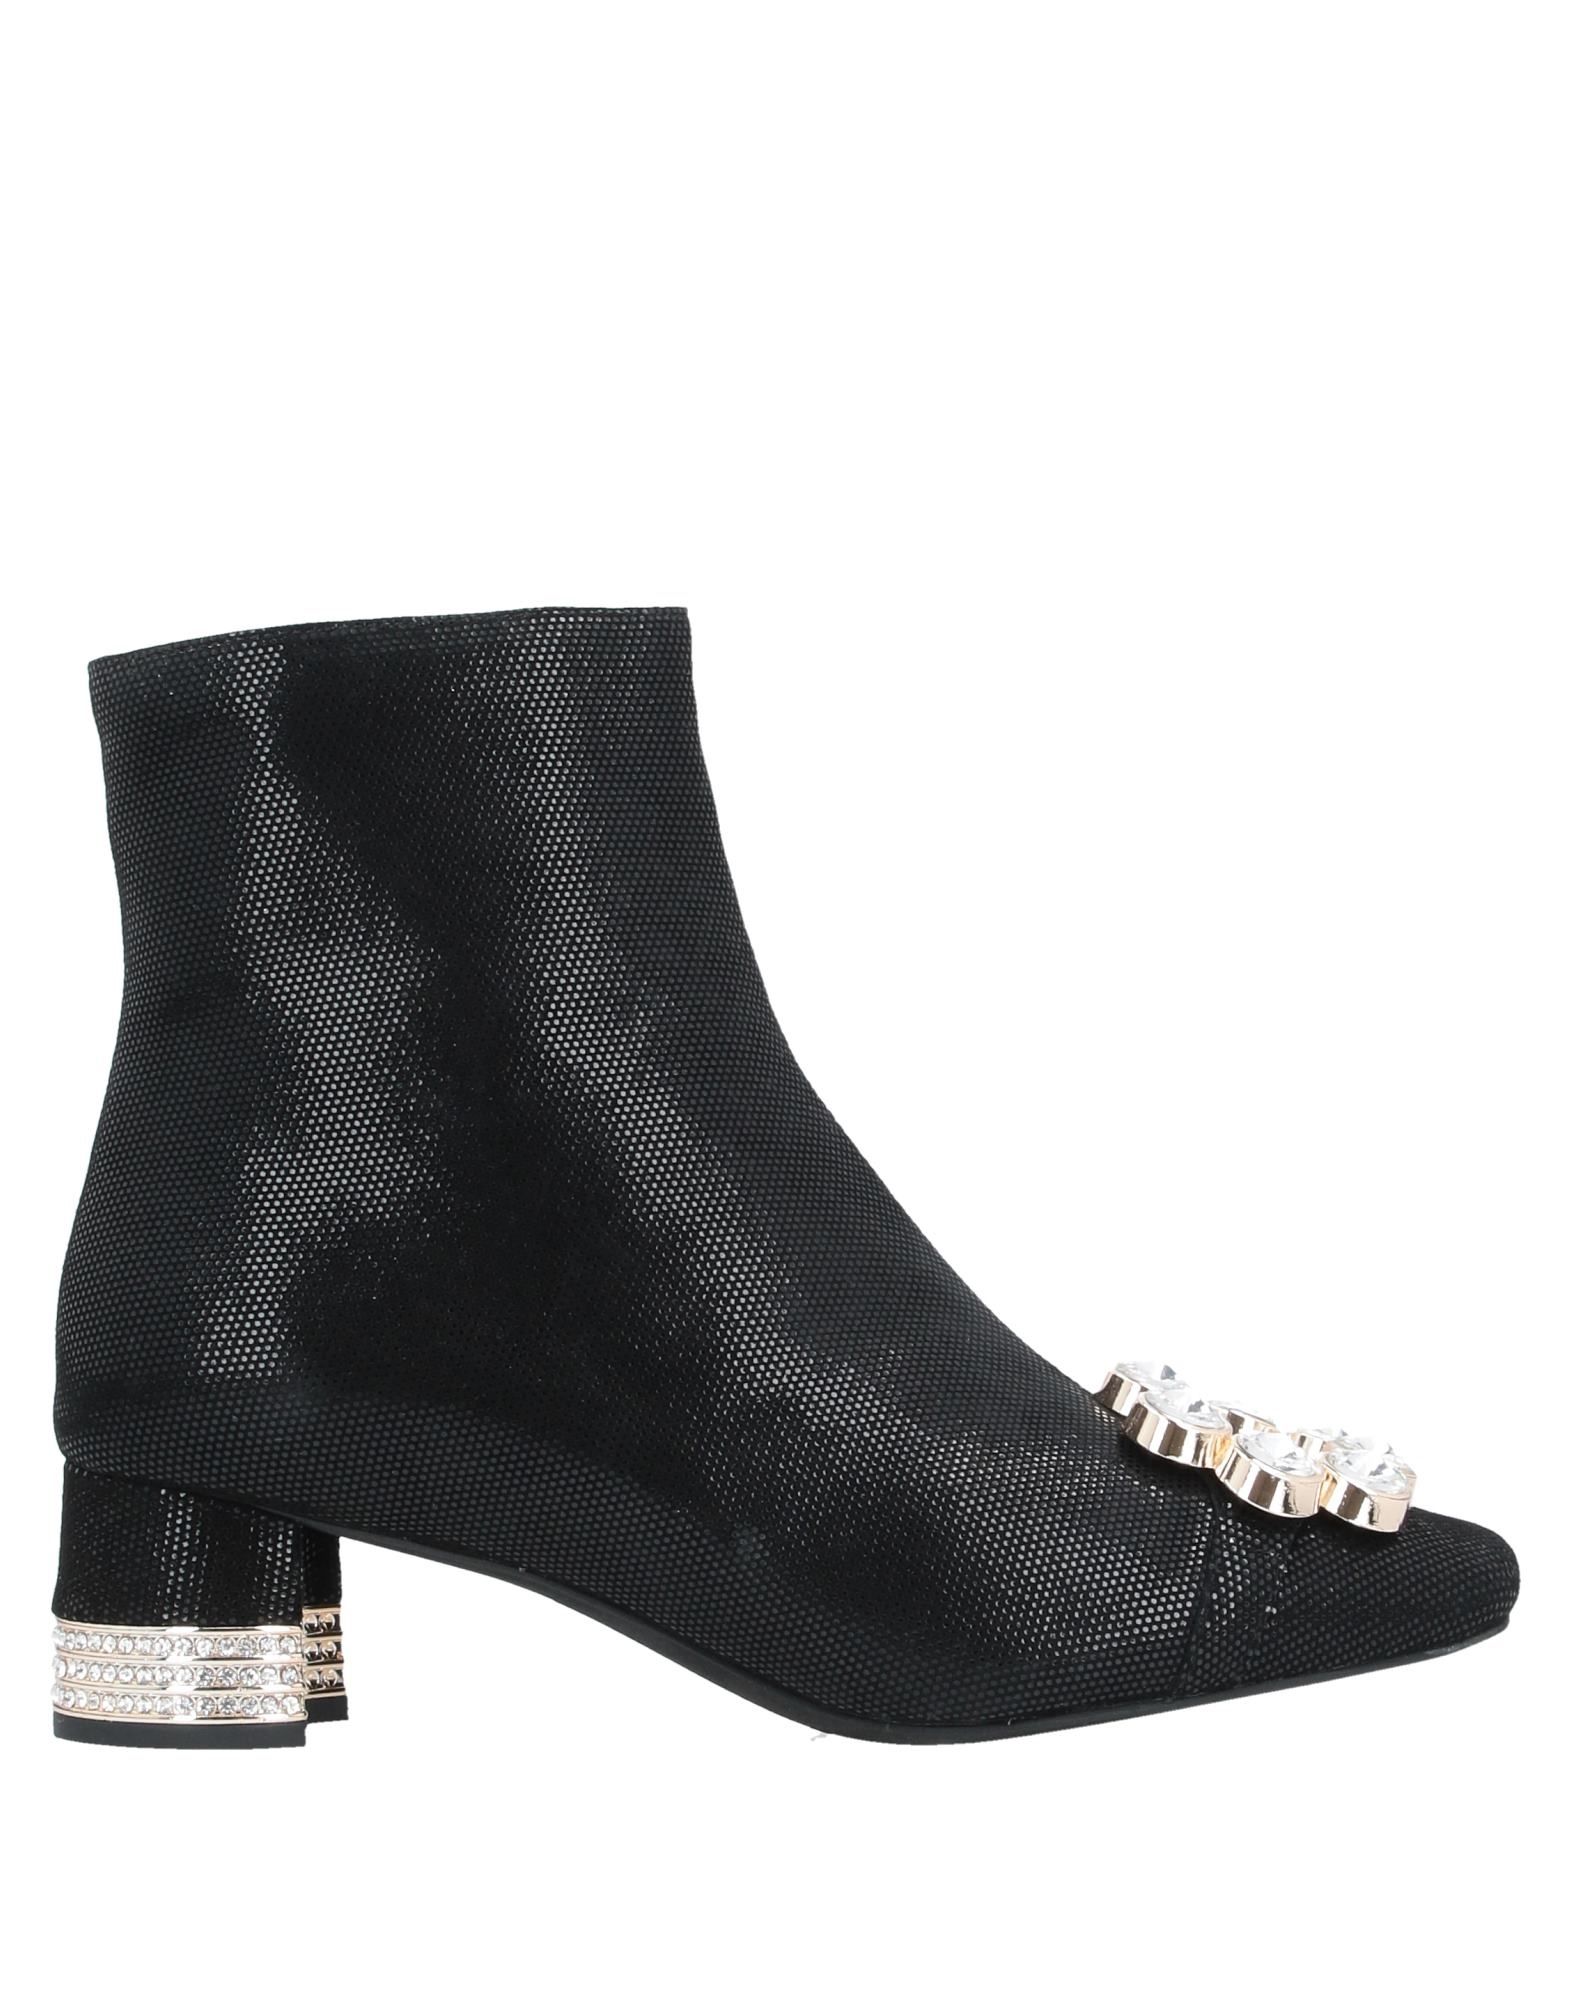 JEFFREY CAMPBELL Ankle boots - Item 11854195